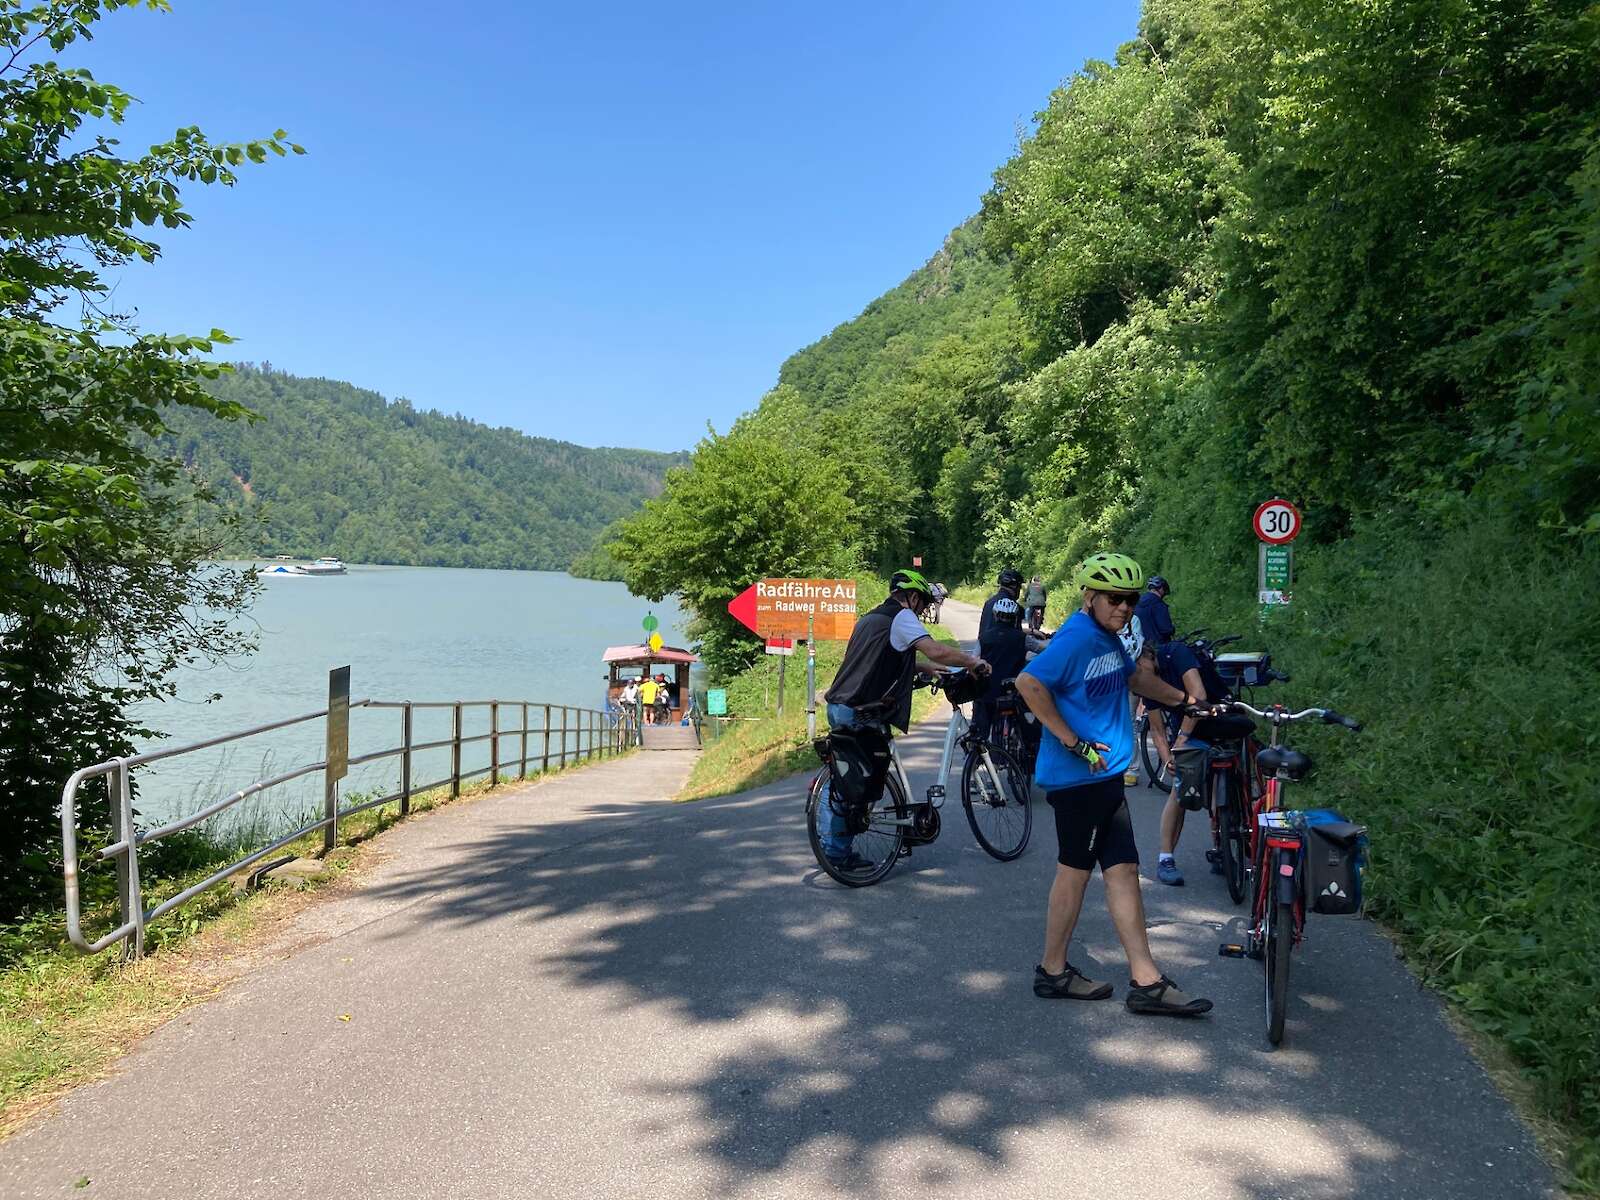 Arriving at the ferry dock after crossing the Danube. "This way, Linda"